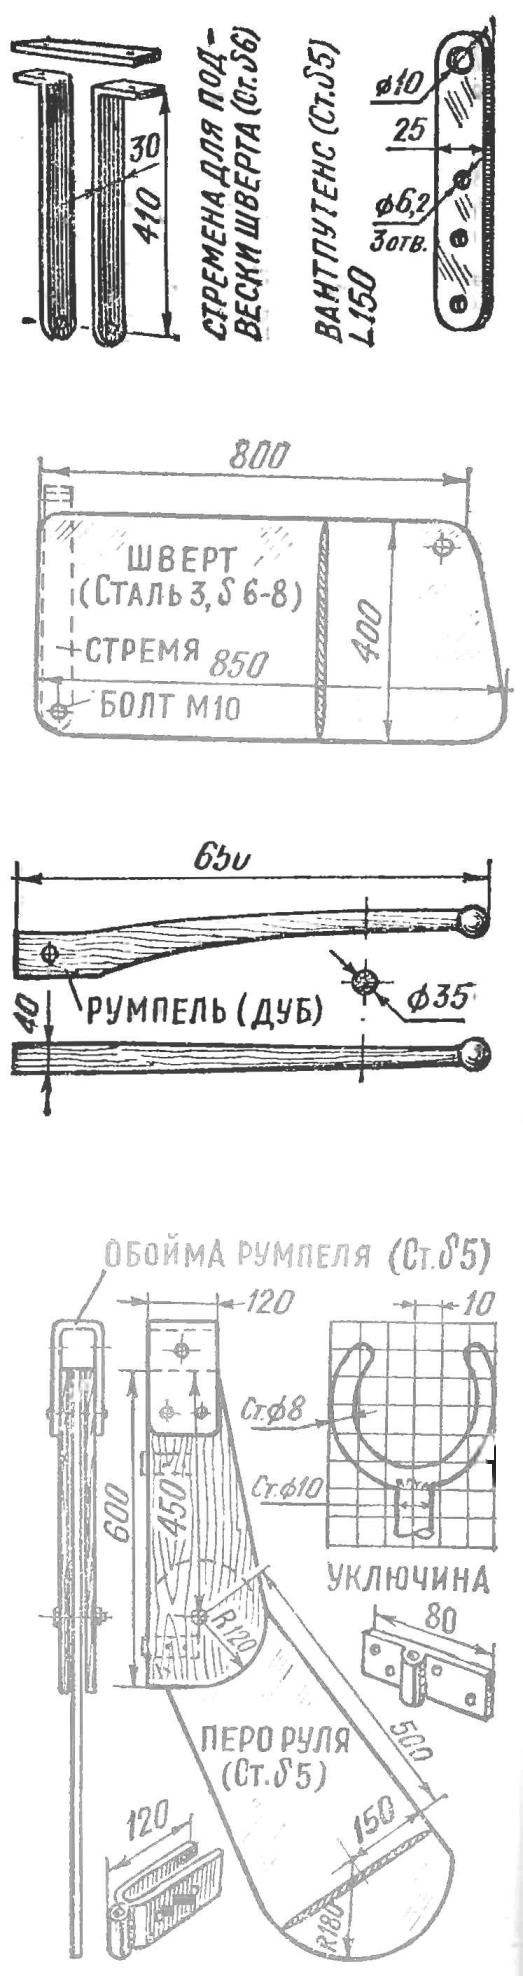 Fig. 4. Sensible things, swivel boom, centerboard and rudder.